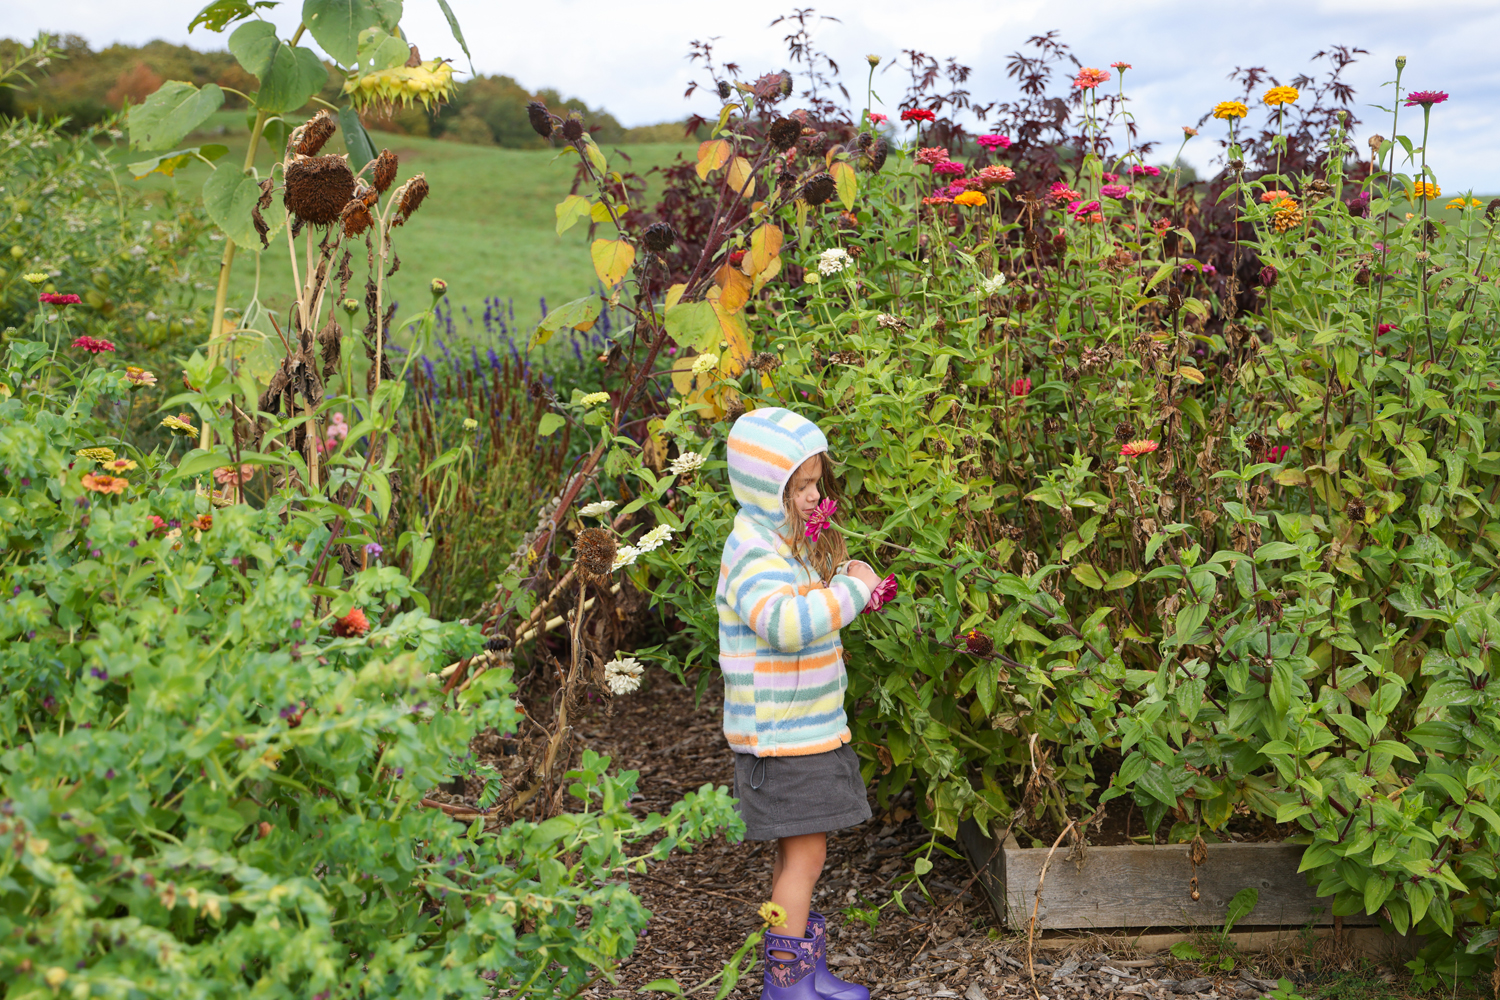 A young child stands in a garden smelling a flower.